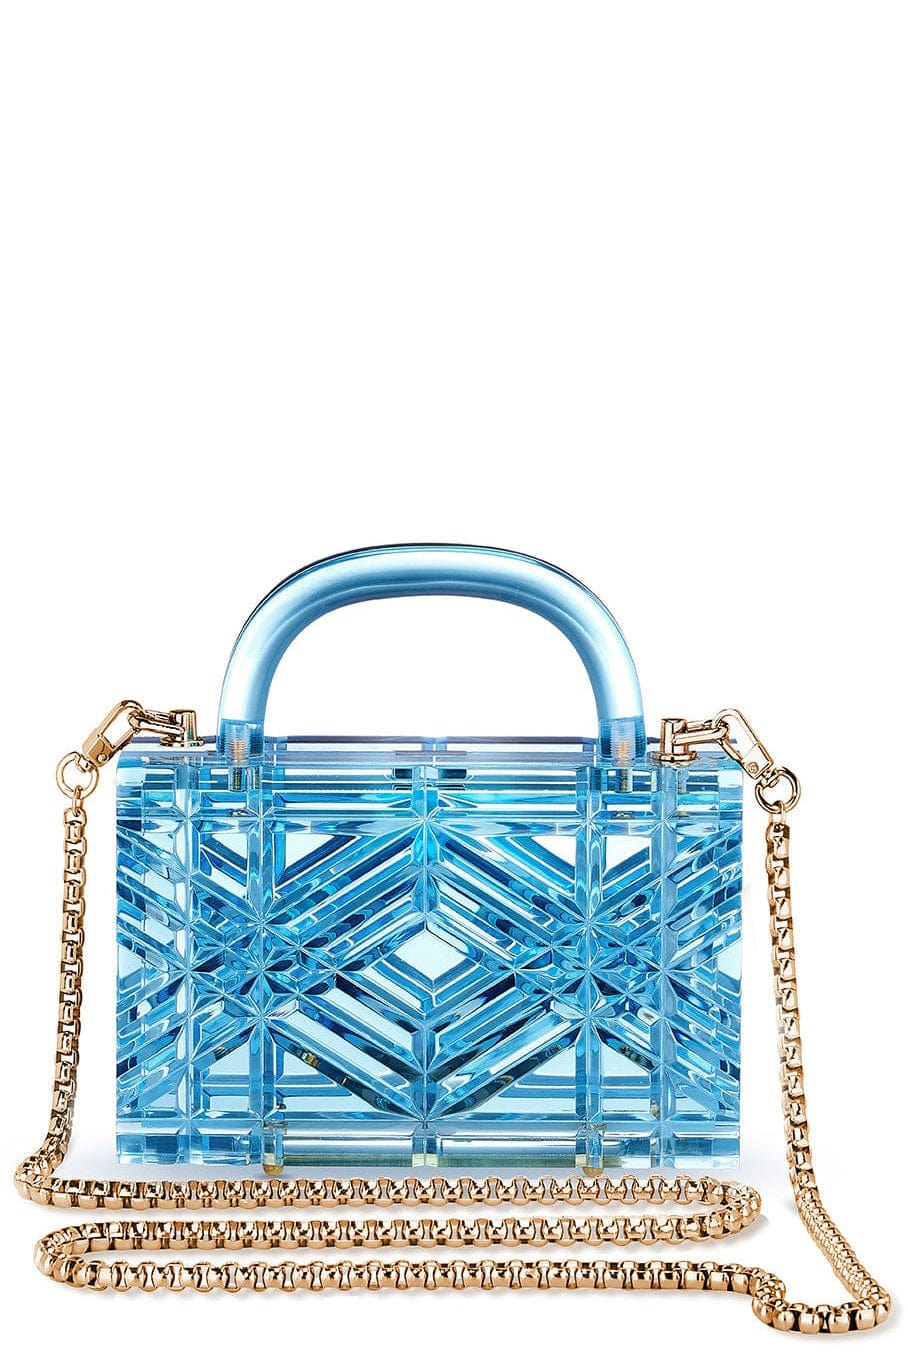 L' AFSHAR-Adele Bag With Gold Link Long Chain-BLUE